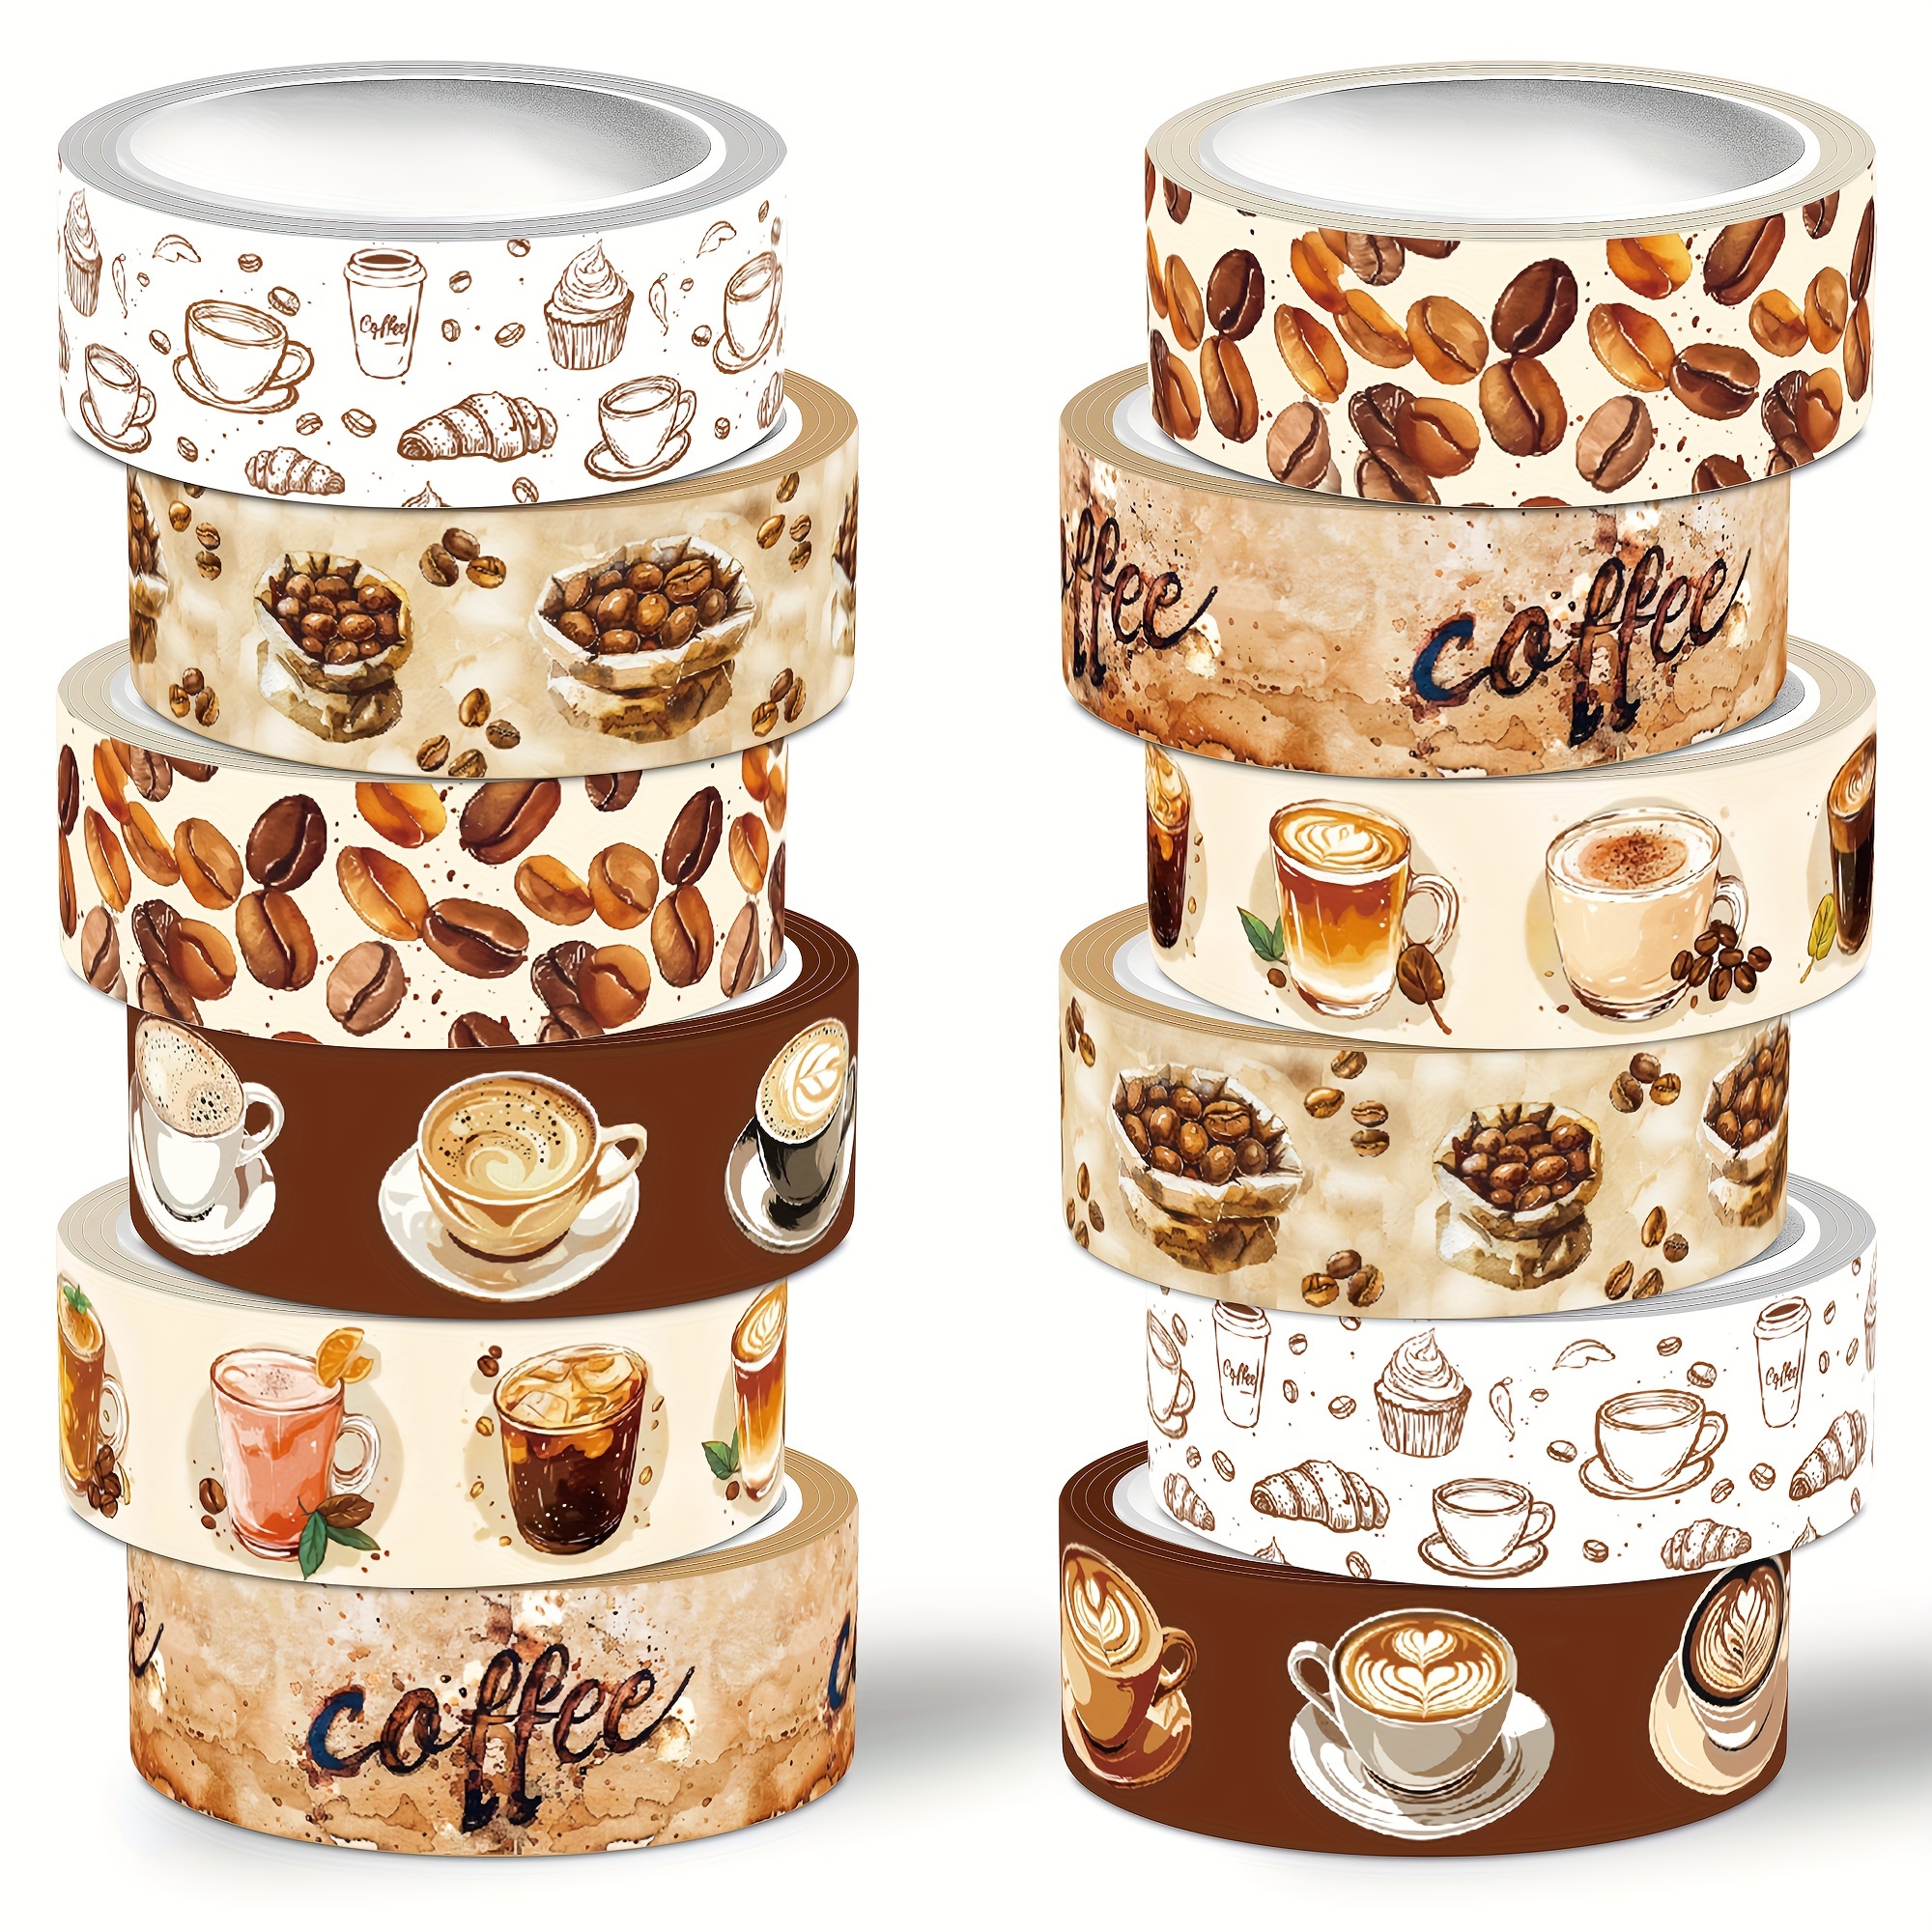 

Nikomie Coffee Washi Tape Set, 12 Rolls Variety Pack, Coffee Bean & Drinks Patterns, Non-waterproof Paper Craft Tape For Scrapbooking, Journaling, Diy Crafts, And Gift Wrapping